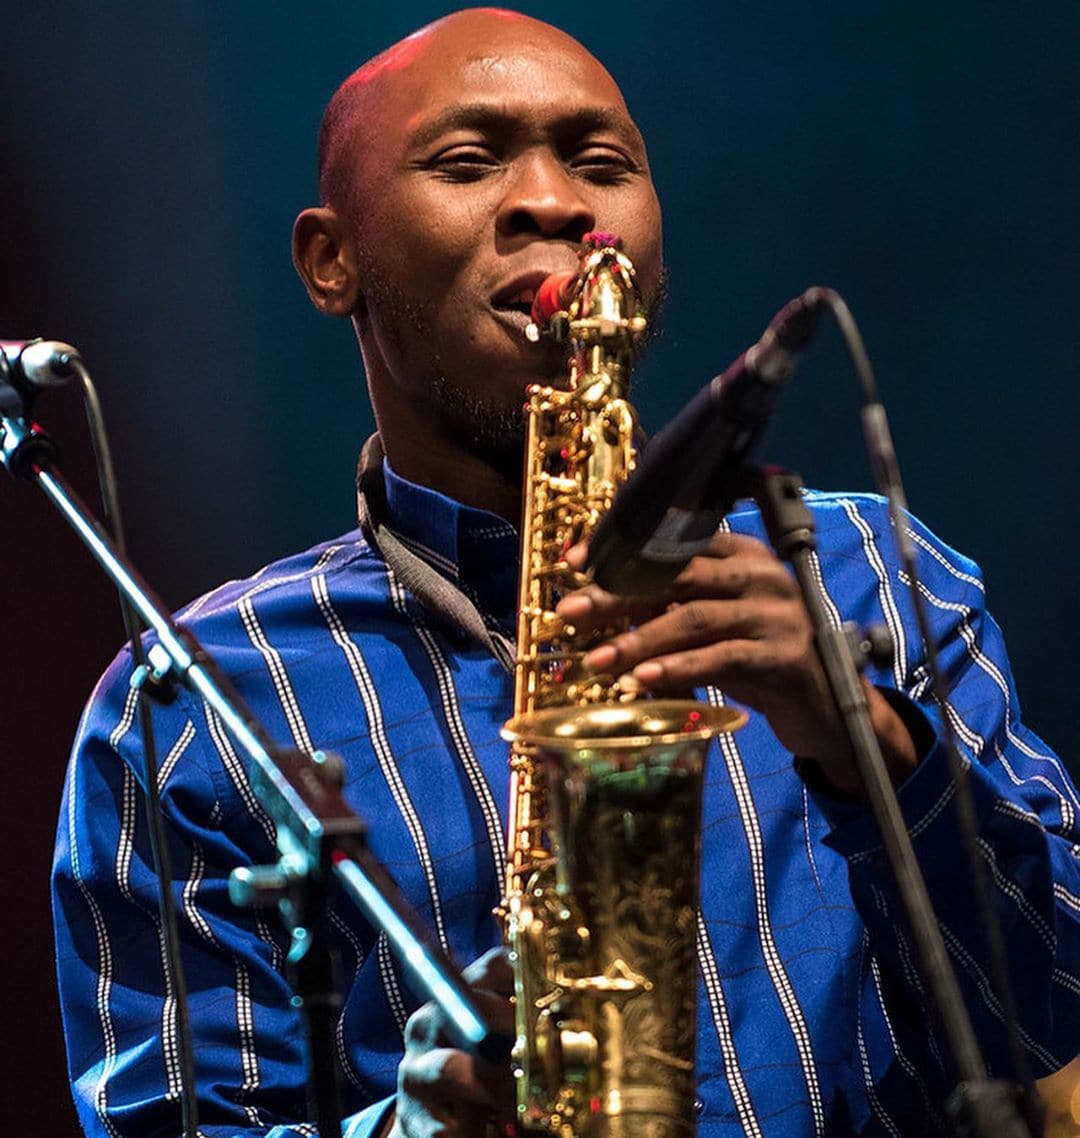 “Kanye West is dangerous to Africans” – Seun Kuti says